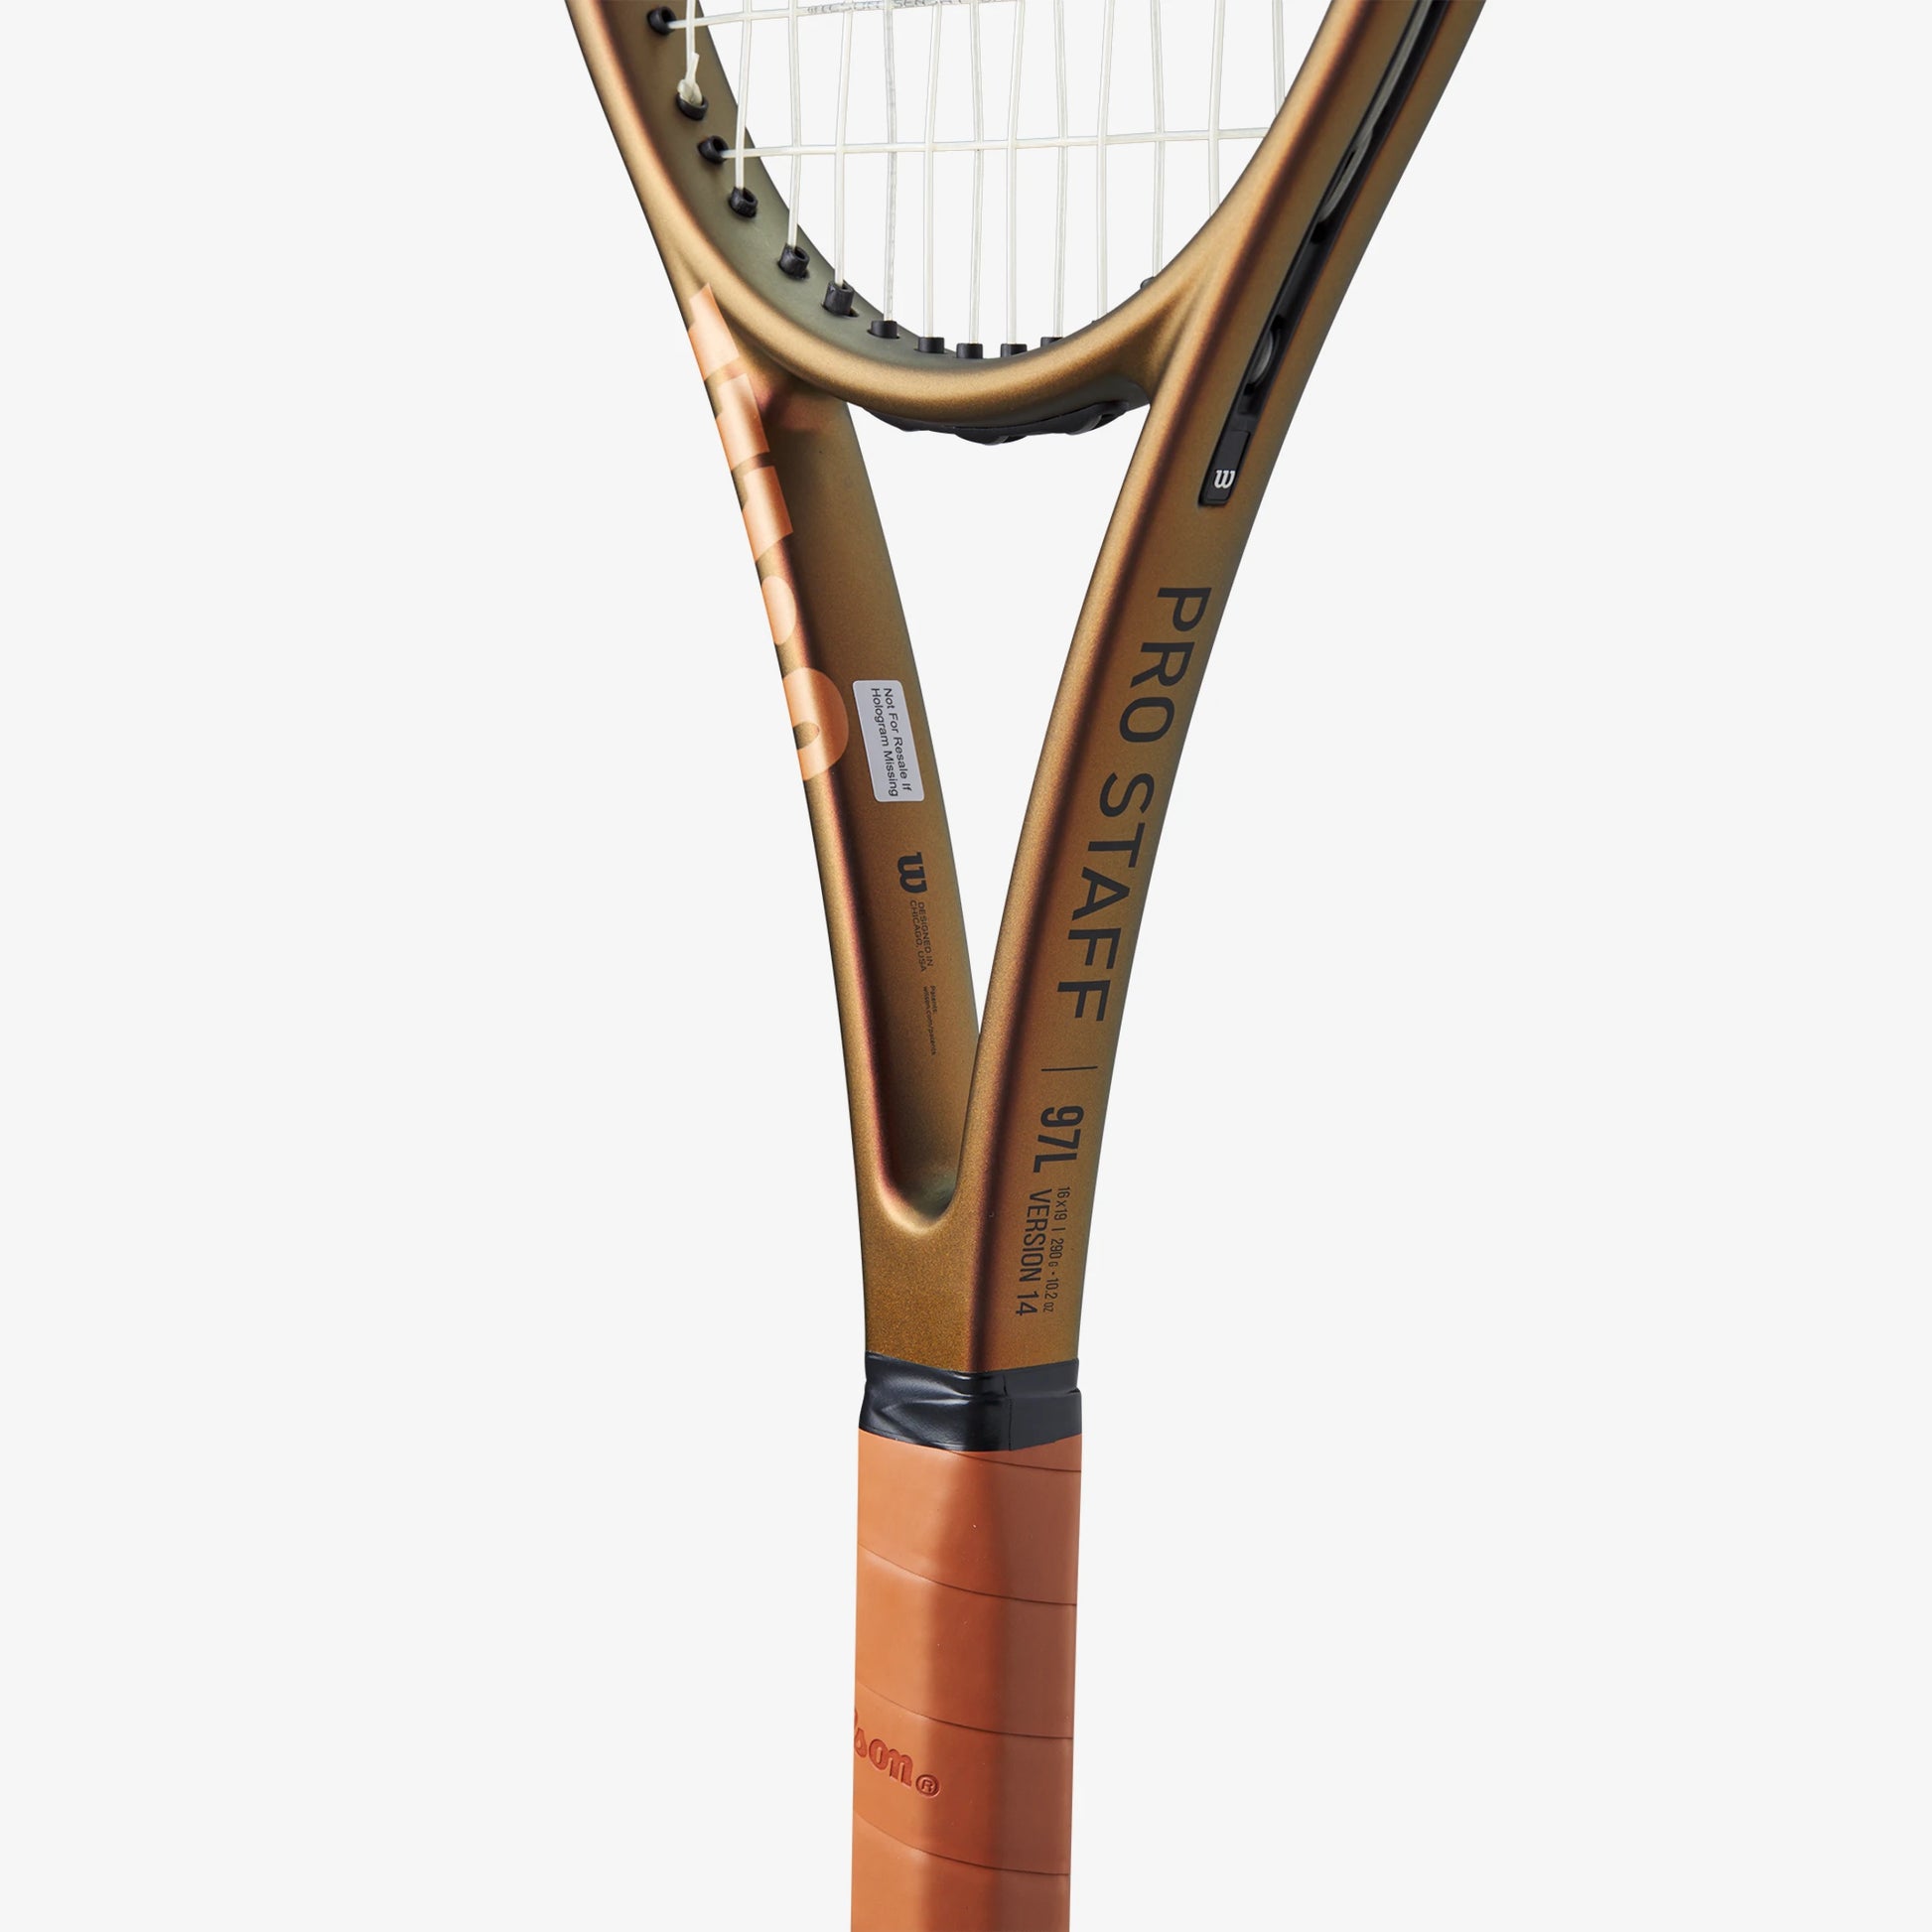 The Wilson Pro Staff 97L Version 14 Tennis Racket available for sale at GSM Sports.